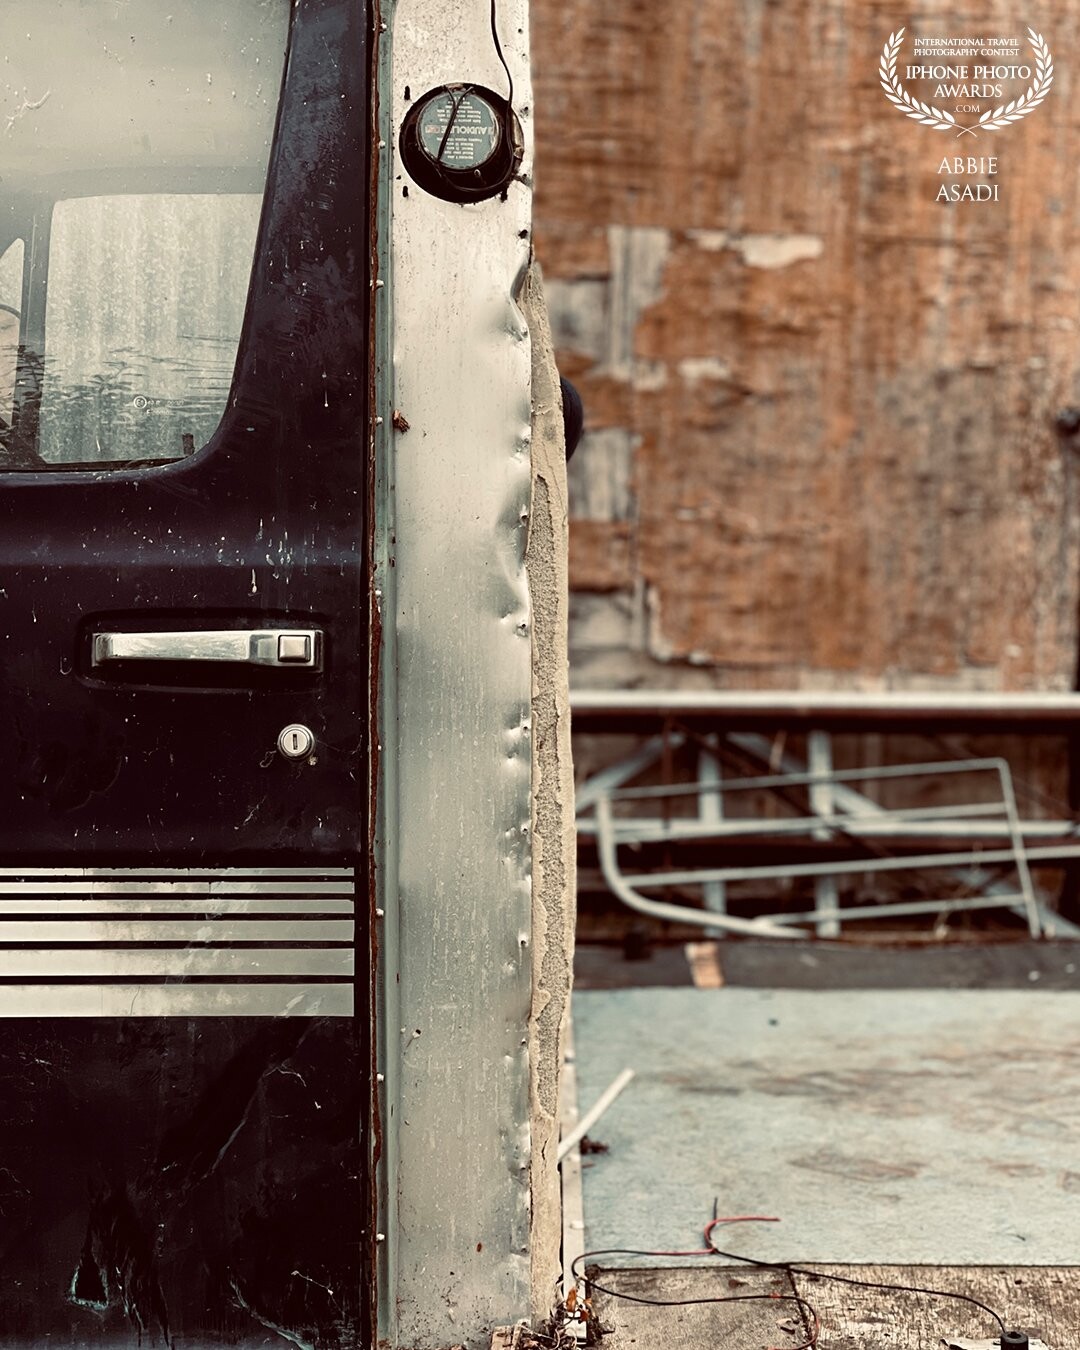 What can see old and useless to some, inspires beauty and creation in others. The details in this old truck were too much to not photograph